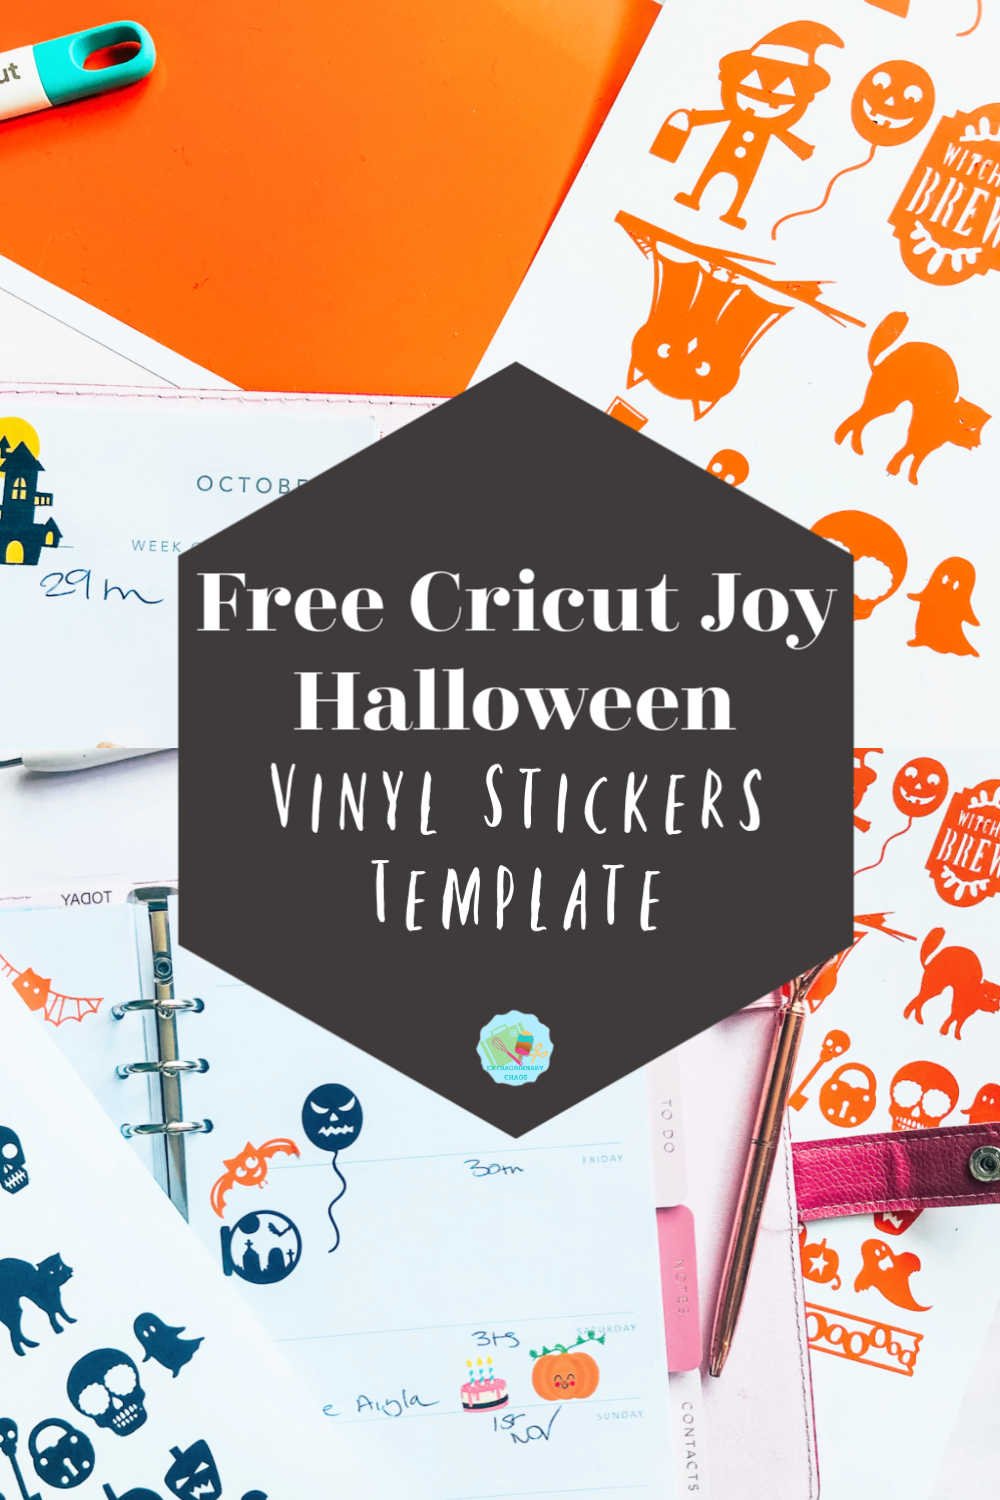 Free Cricut Joy Halloween Vinyl Stickers Template To Download and cut out, for trick or treating, Halloween Crafts and spooking planner stickers -2